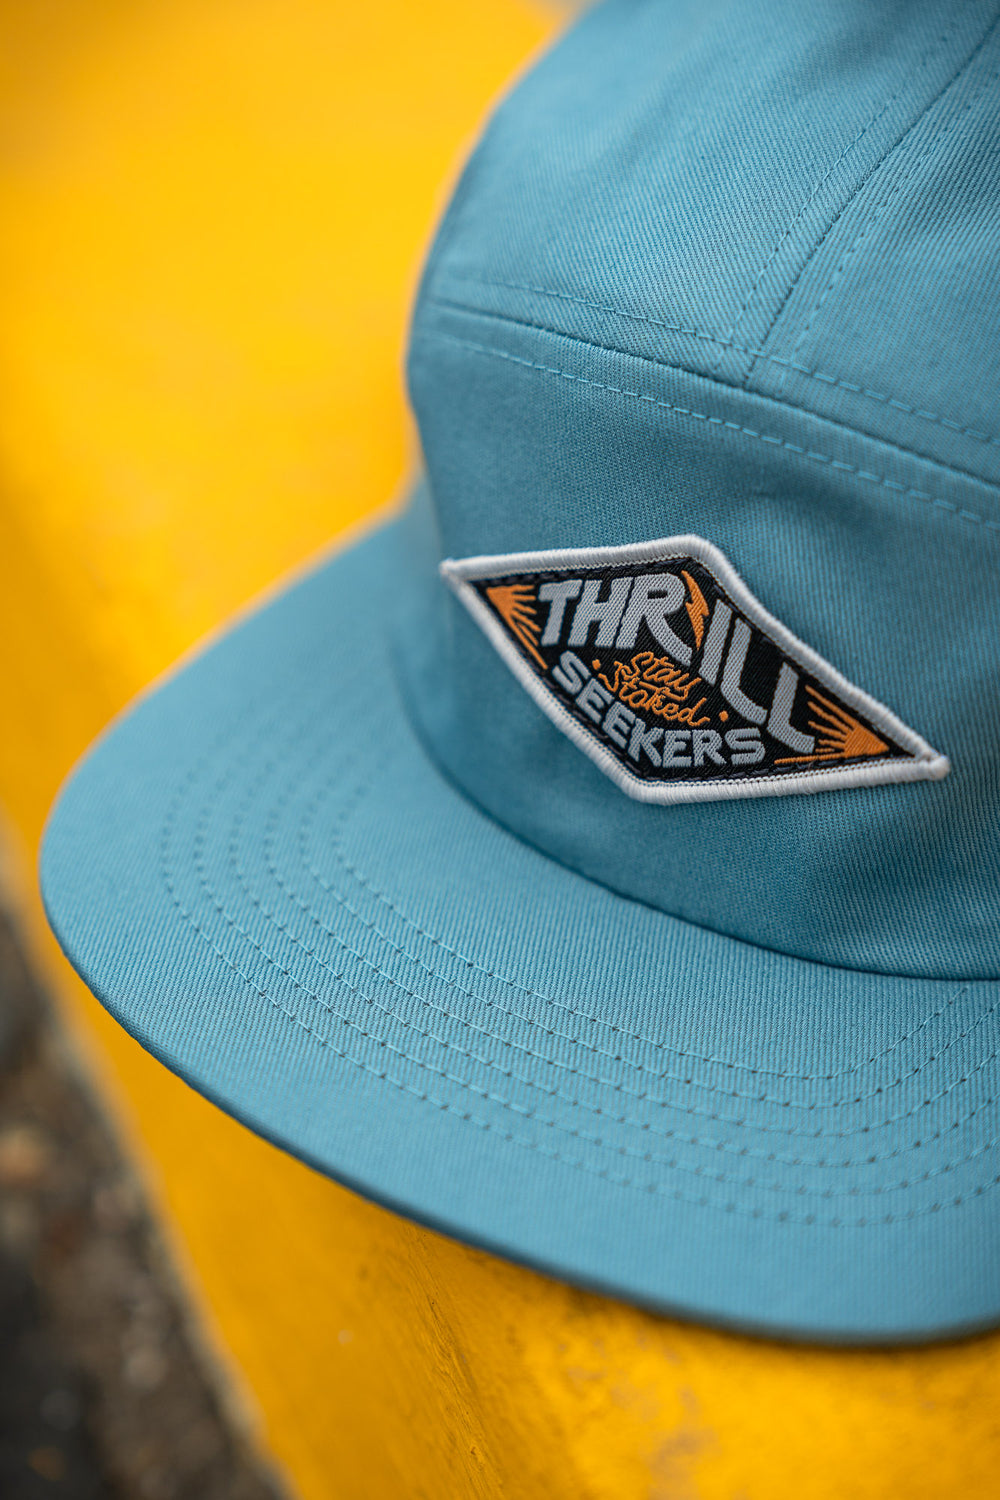 Thrill Seekers Quest 5 Panel Slate Blue